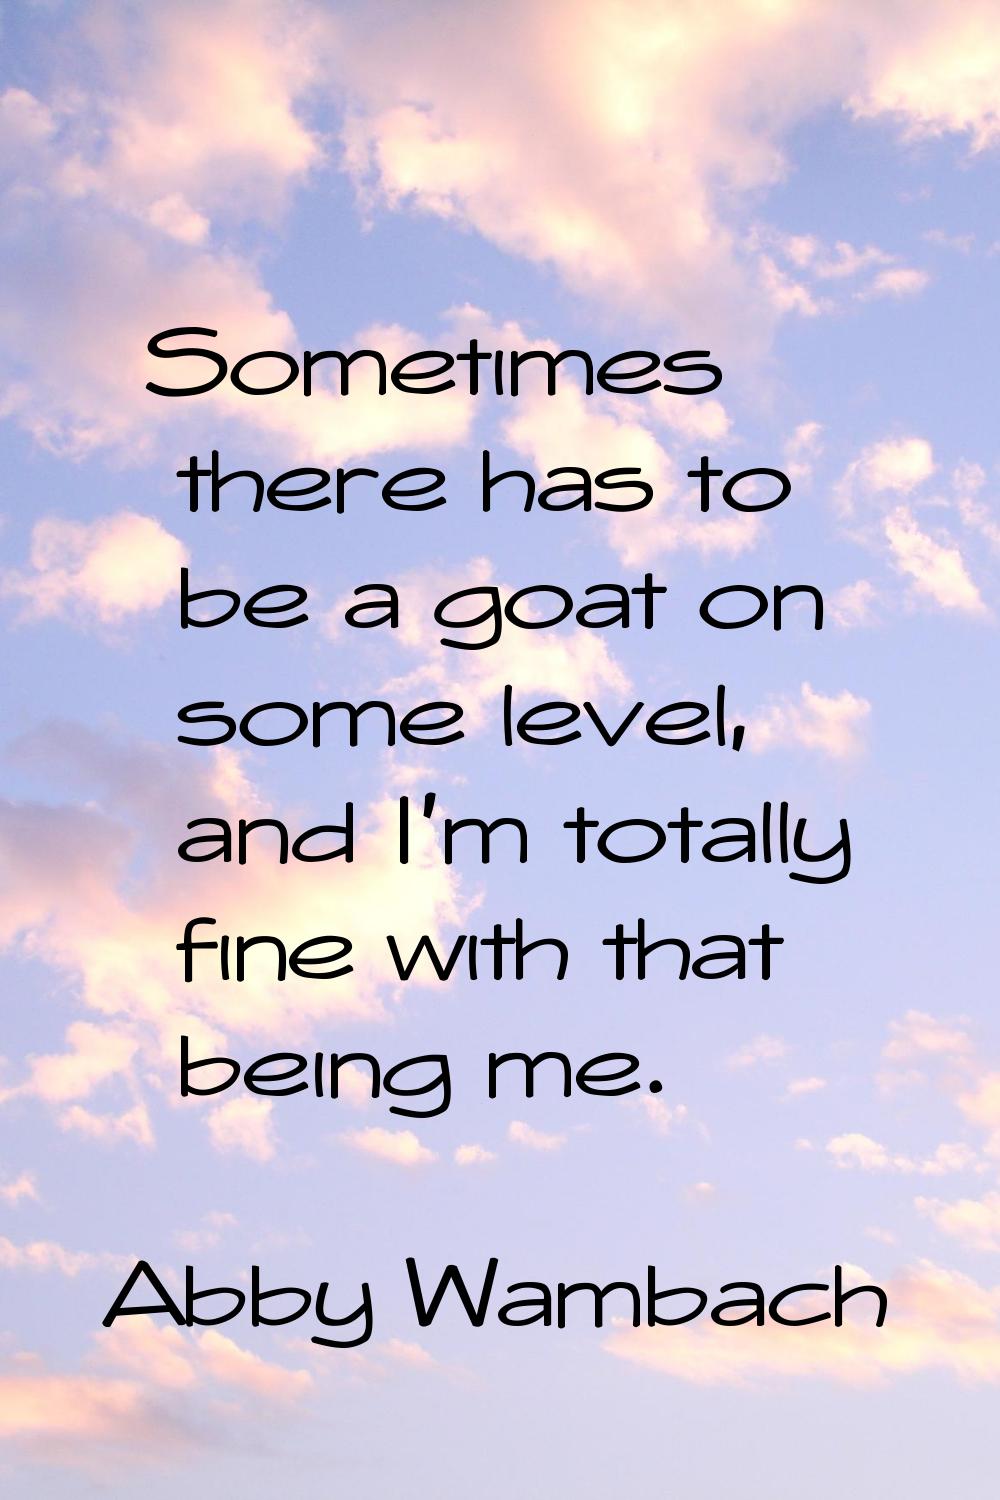 Sometimes there has to be a goat on some level, and I'm totally fine with that being me.